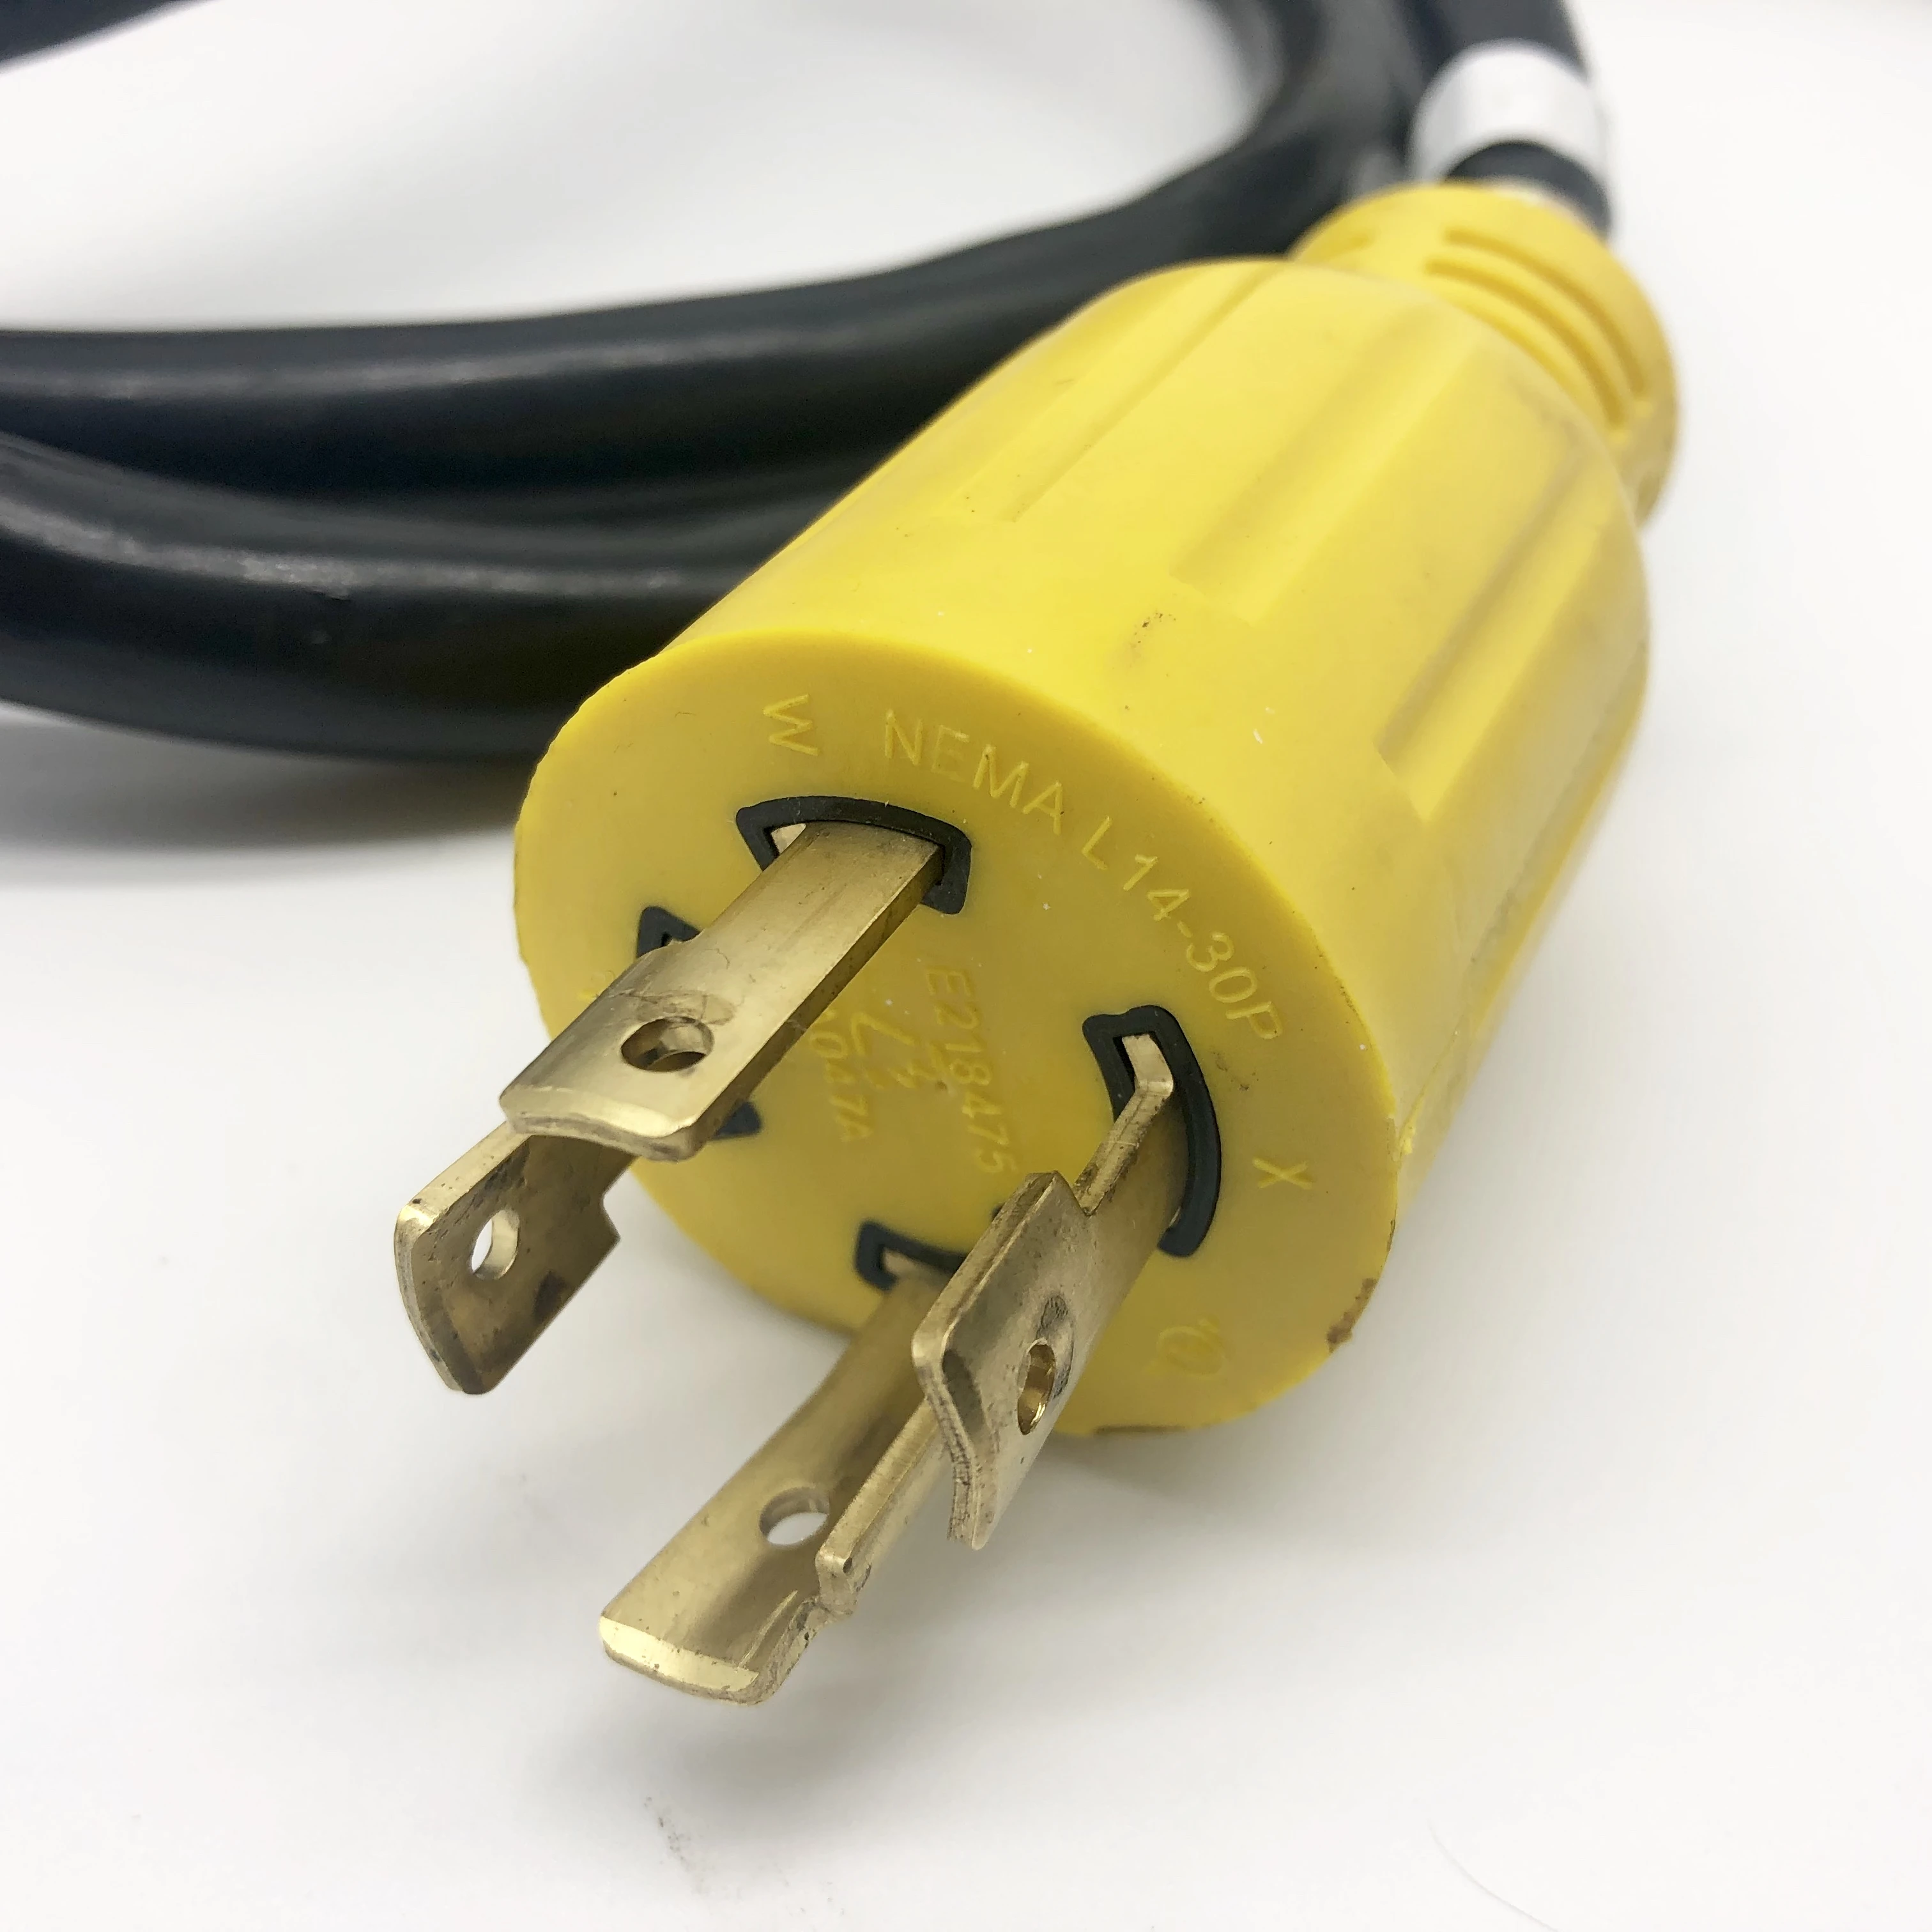 Locking power supply cord with 3 Outlet Extension cords strip